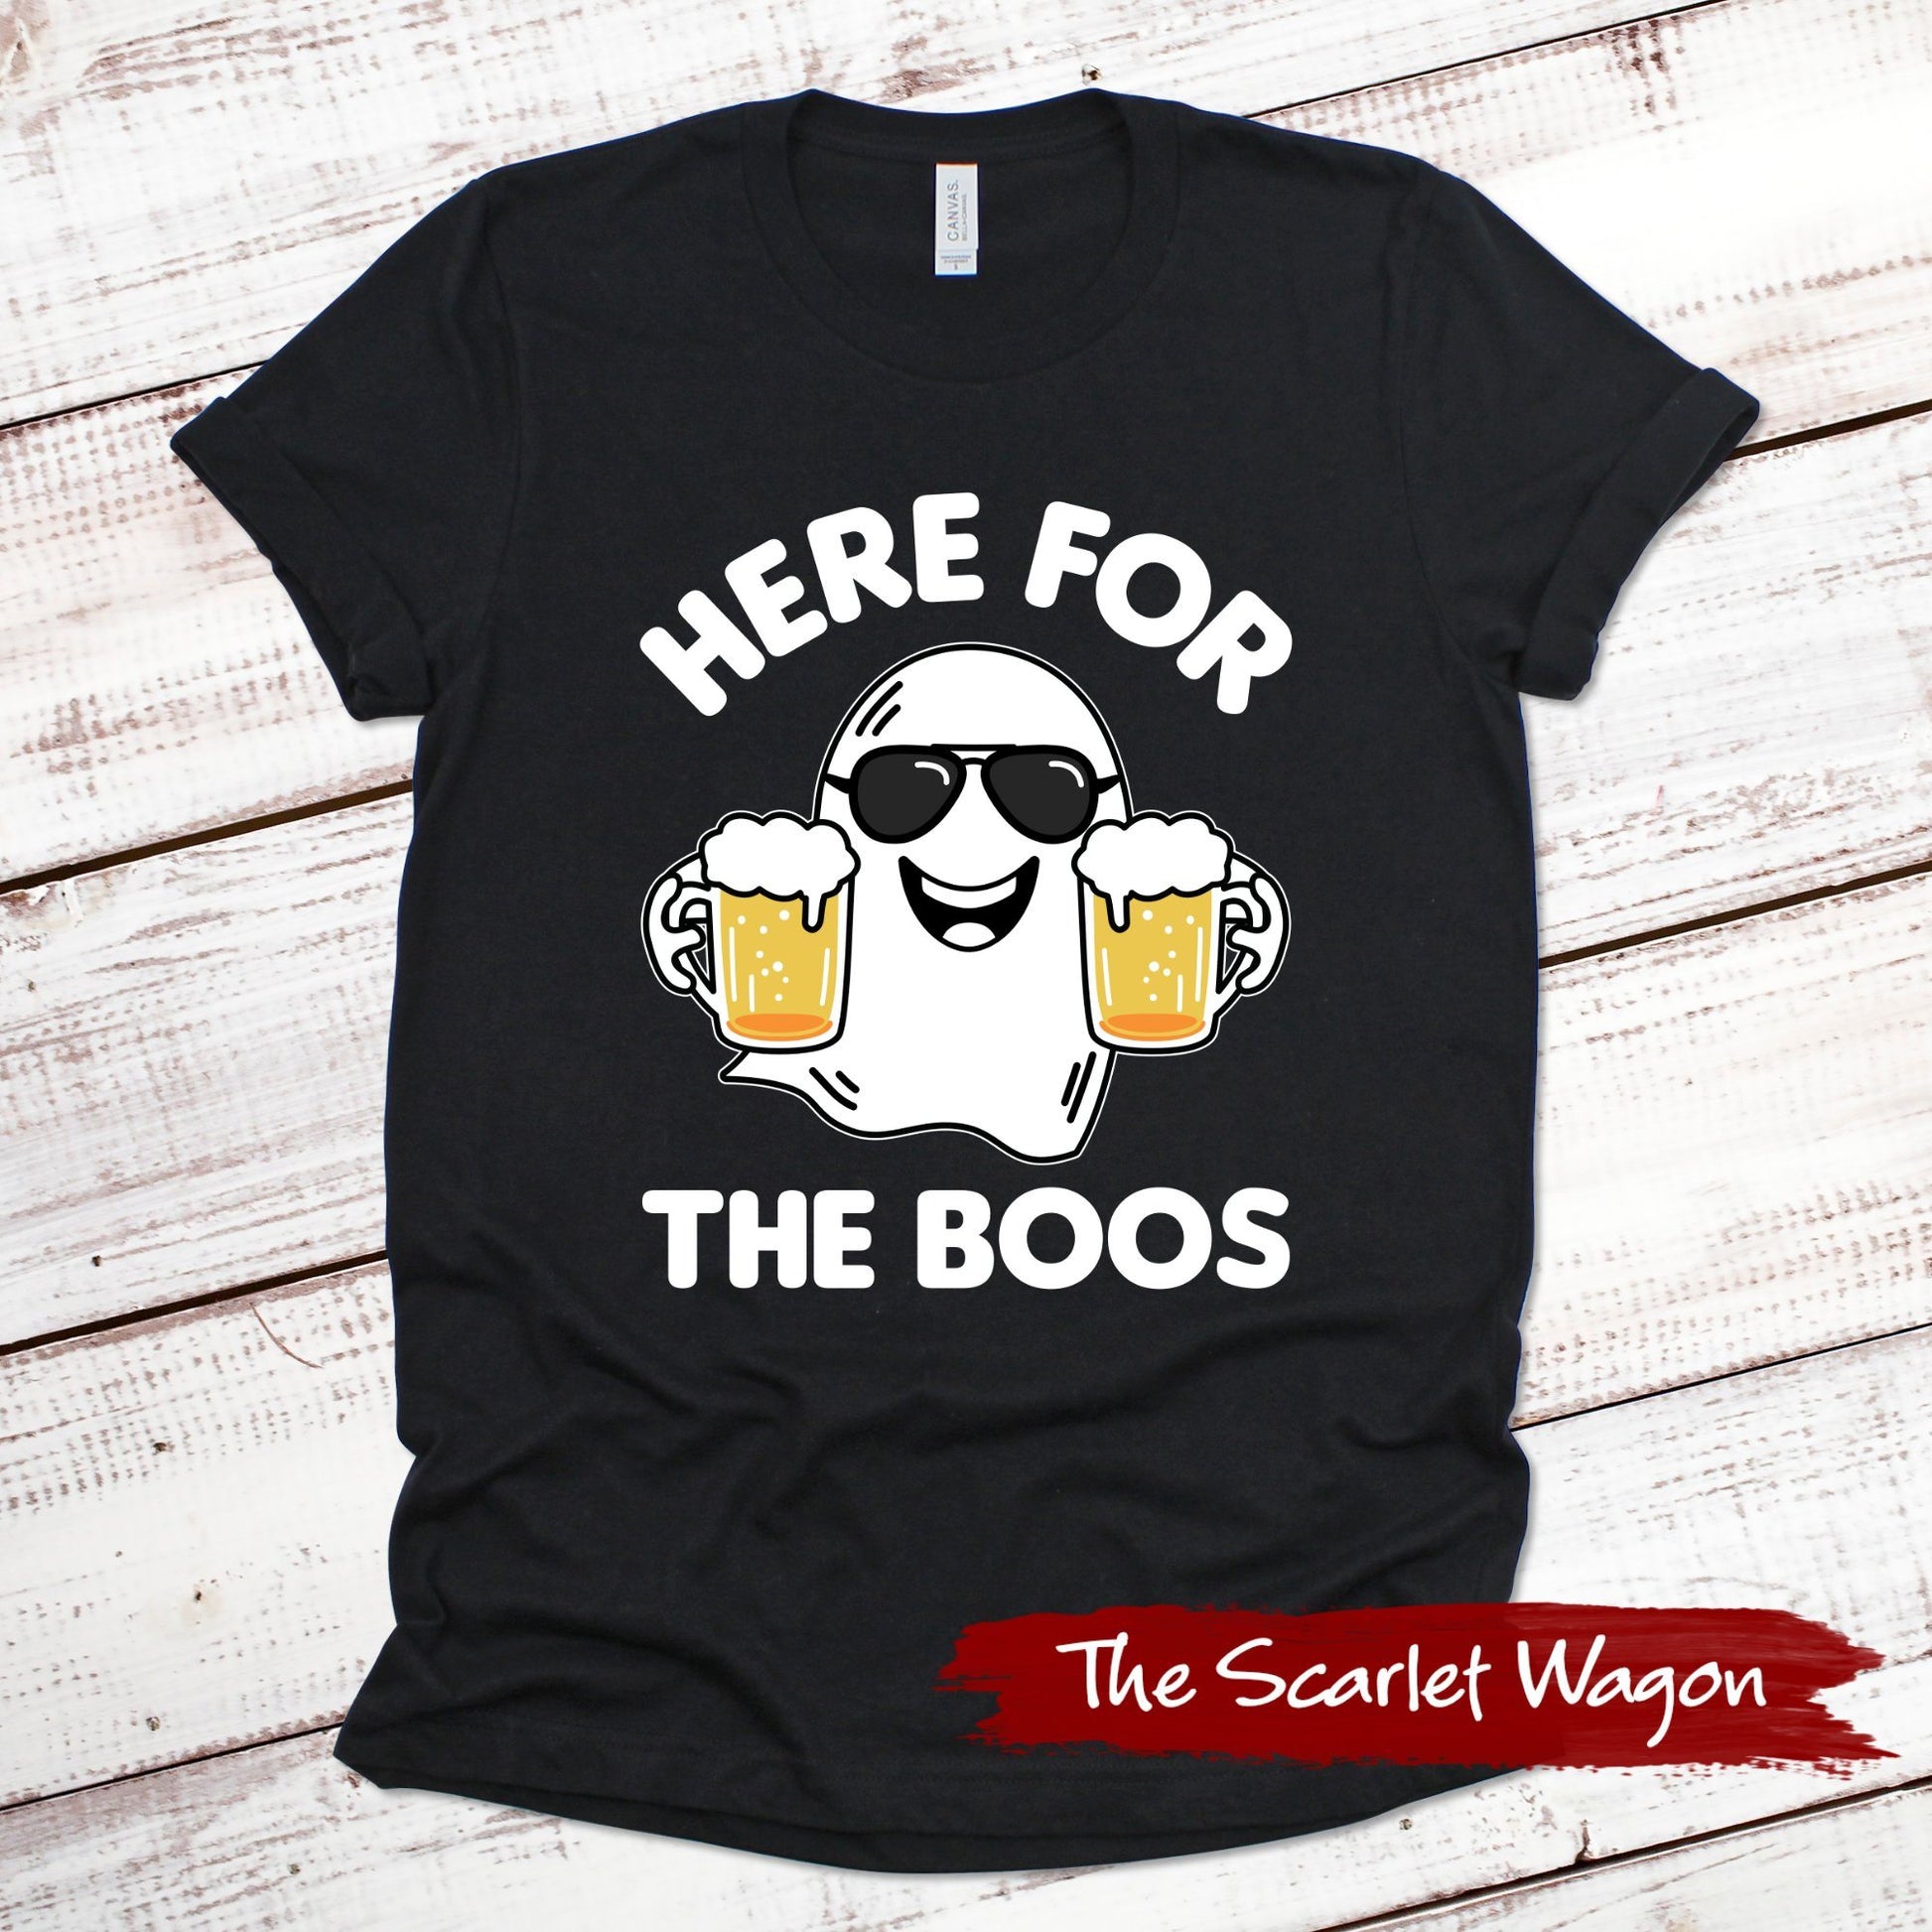 Here for the Boos Halloween Shirt Scarlet Wagon Black XS 